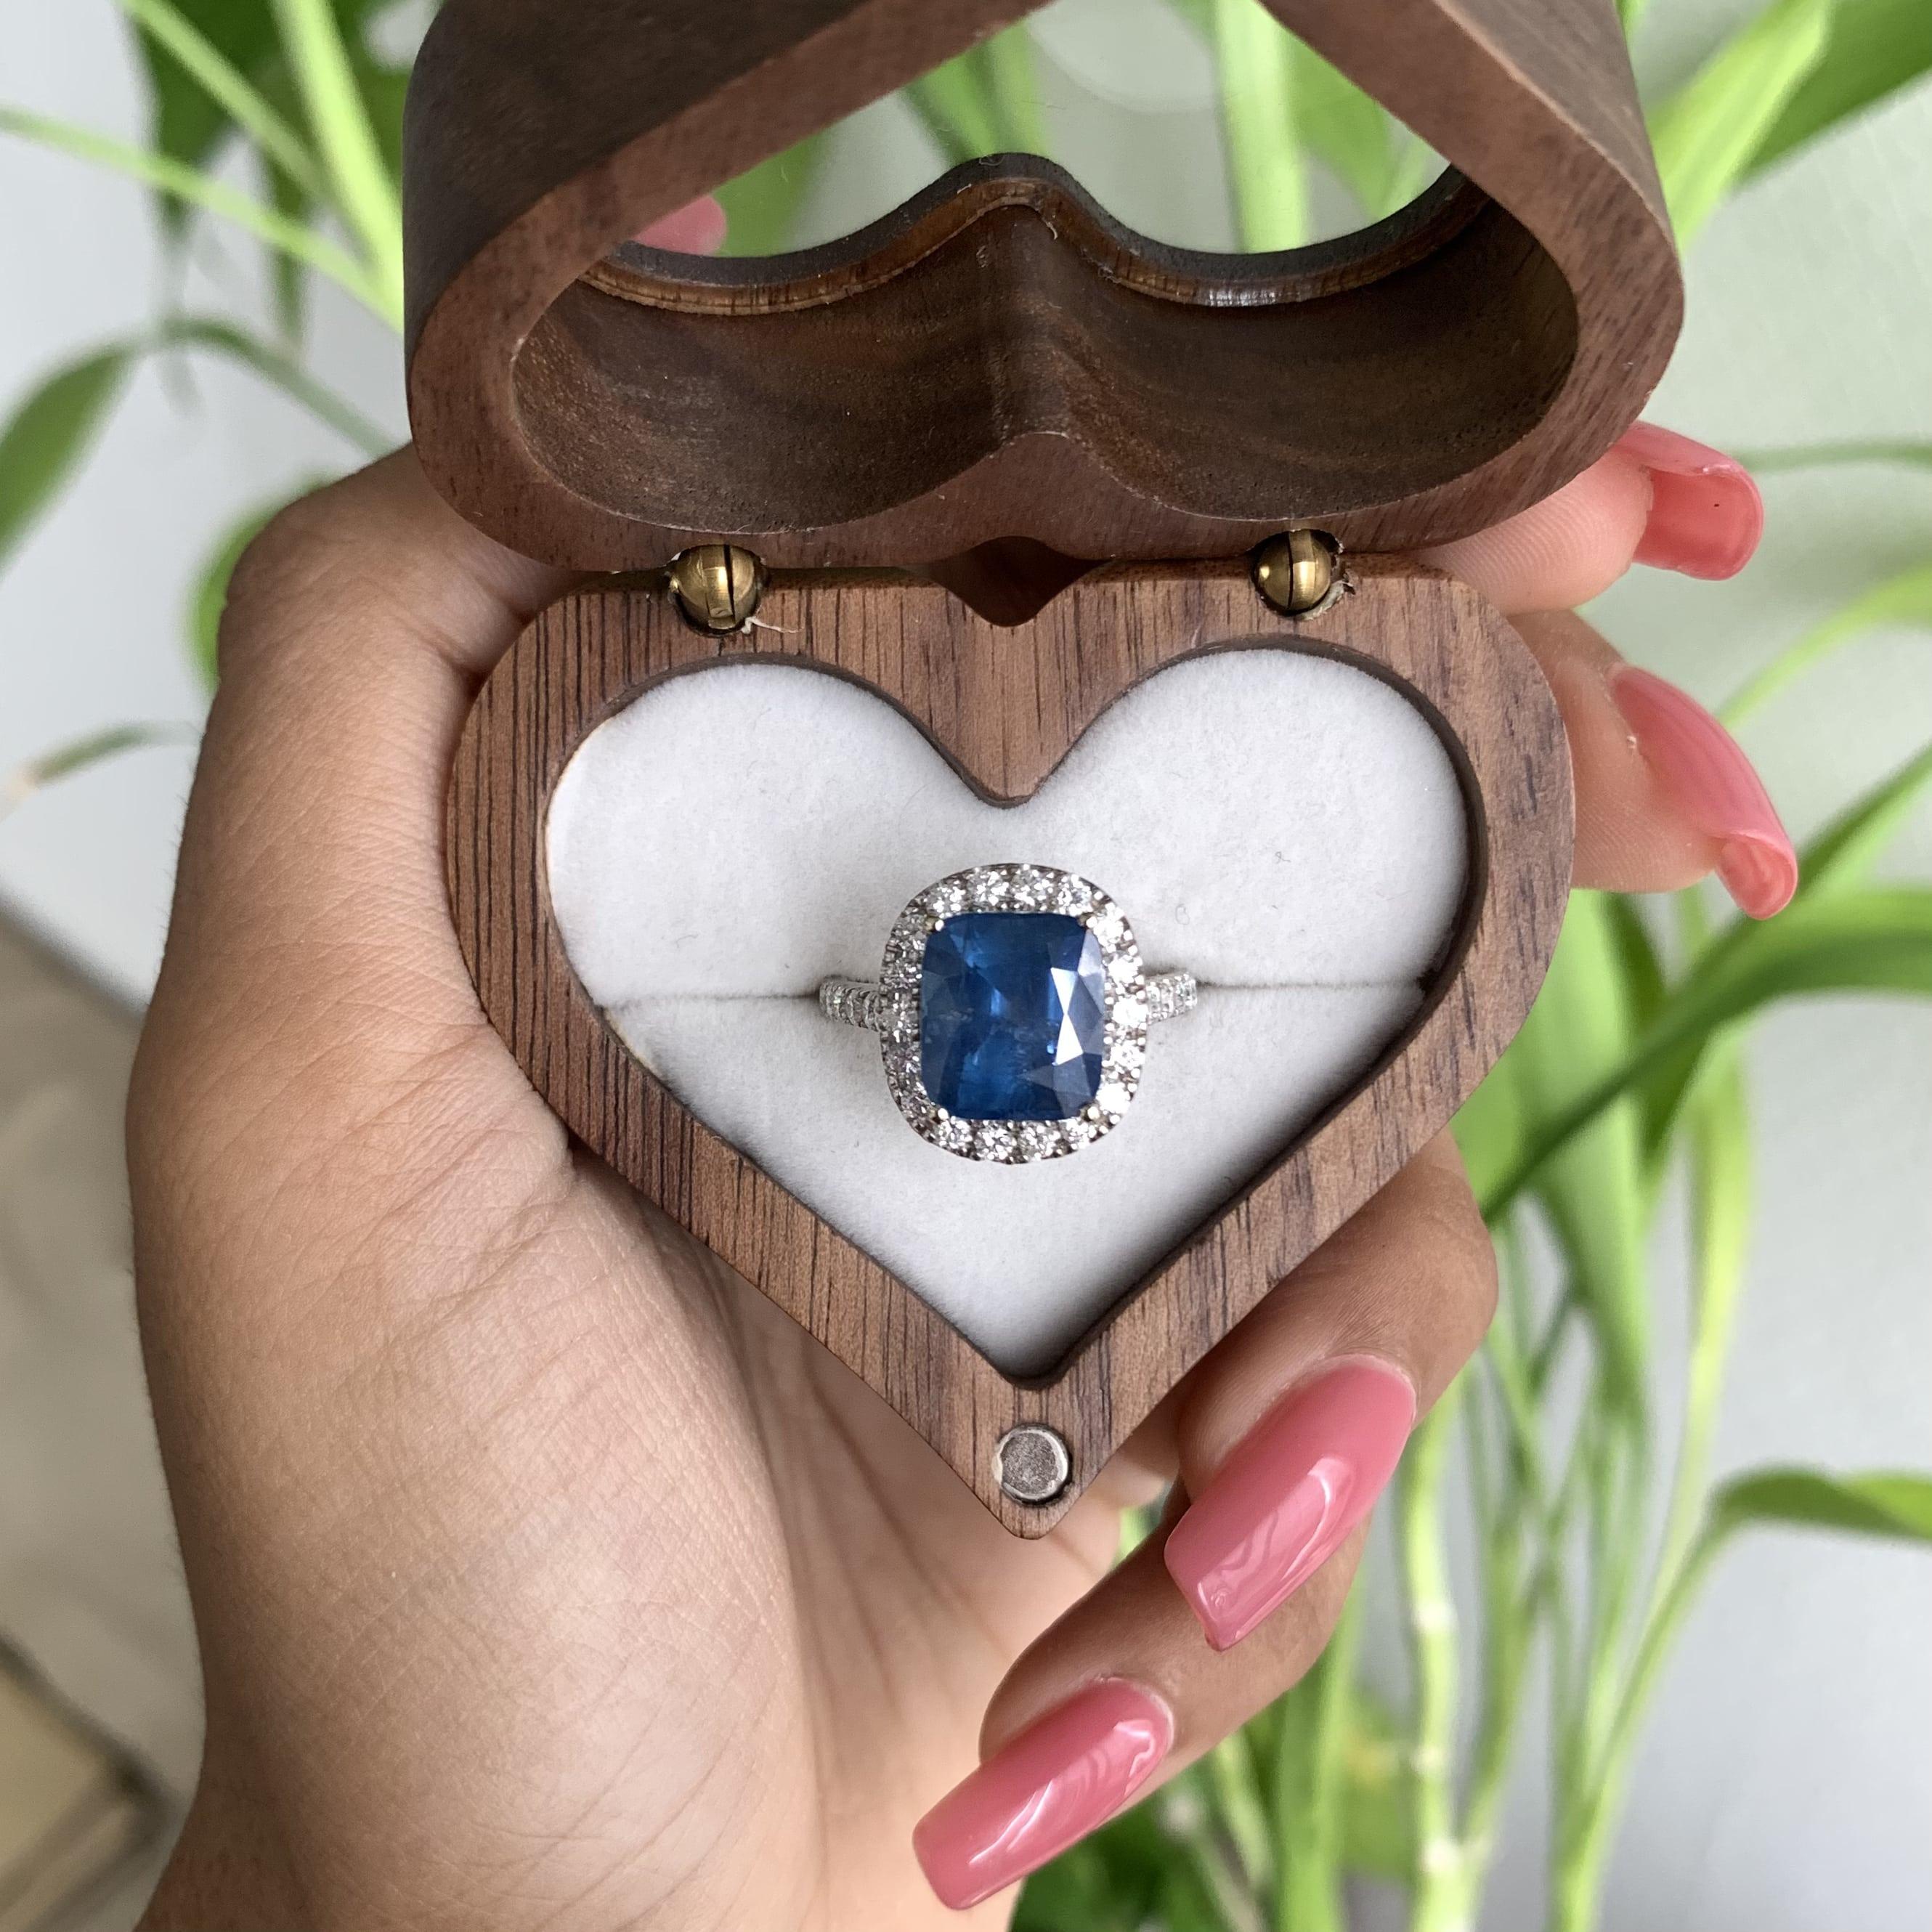 A true masterpiece that captures the essence of elegance and sophistication. This enchanting piece of jewellery boasts a magnificent centerpiece - a stunning 5.68 carat teal blue cushion-cut sapphire, radiating with a captivating teal hue that